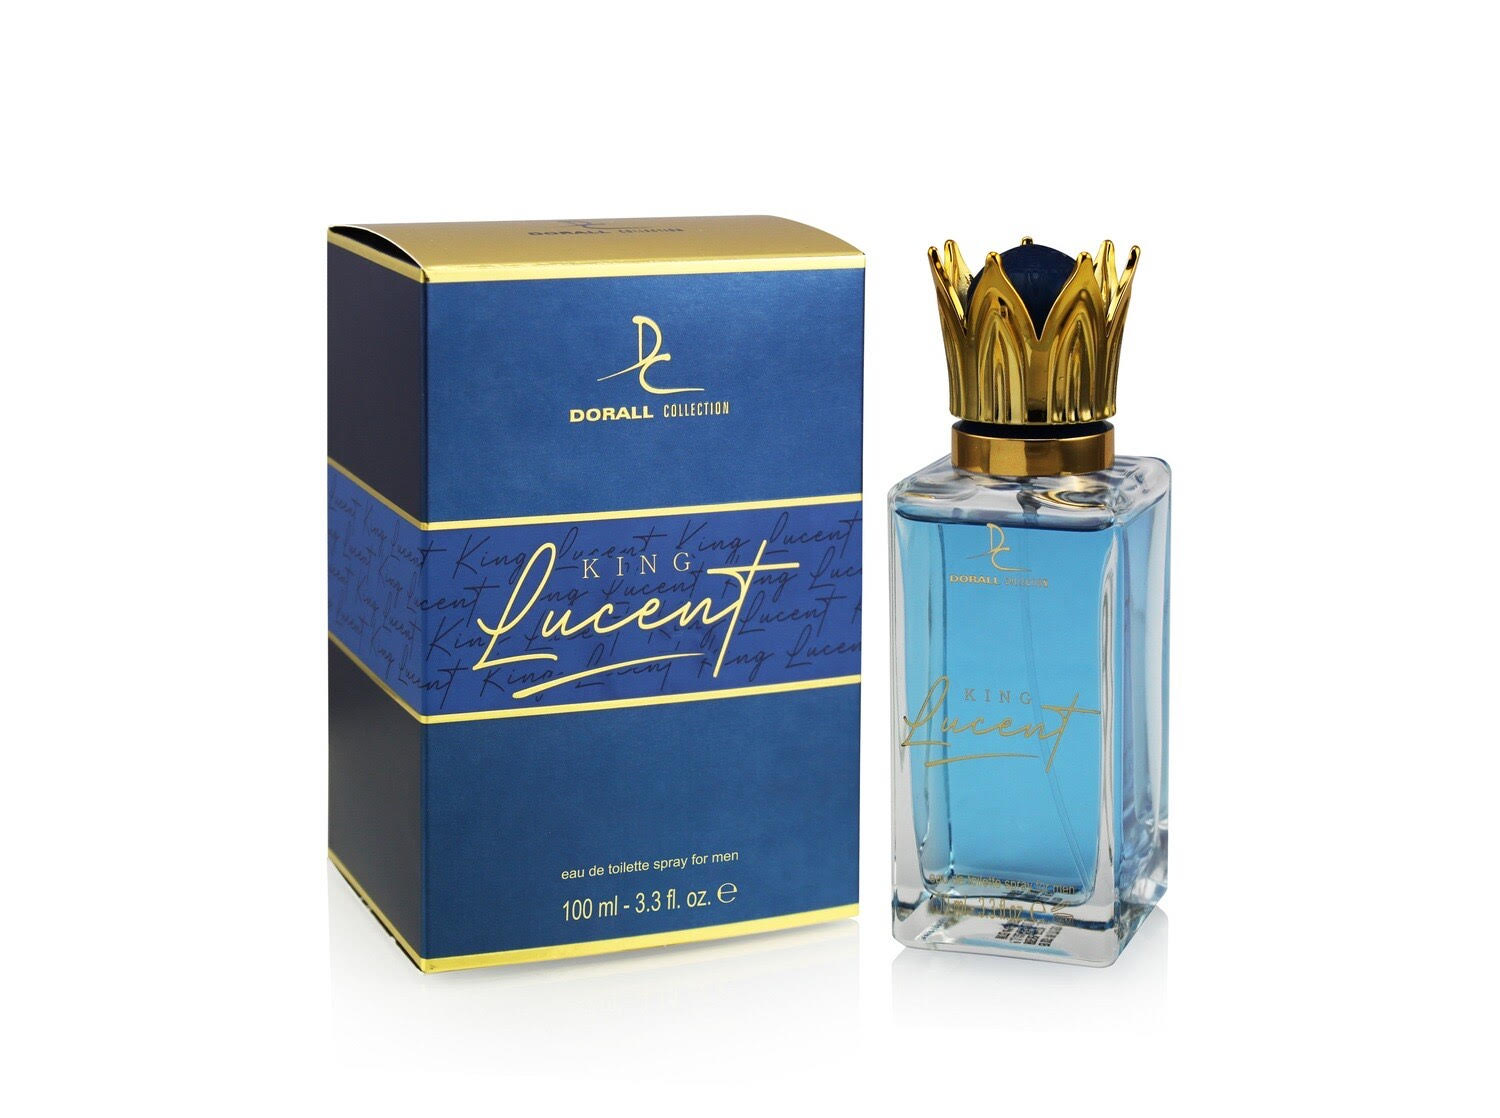 Dorall Collection King Lucent - theperfumestore.lk